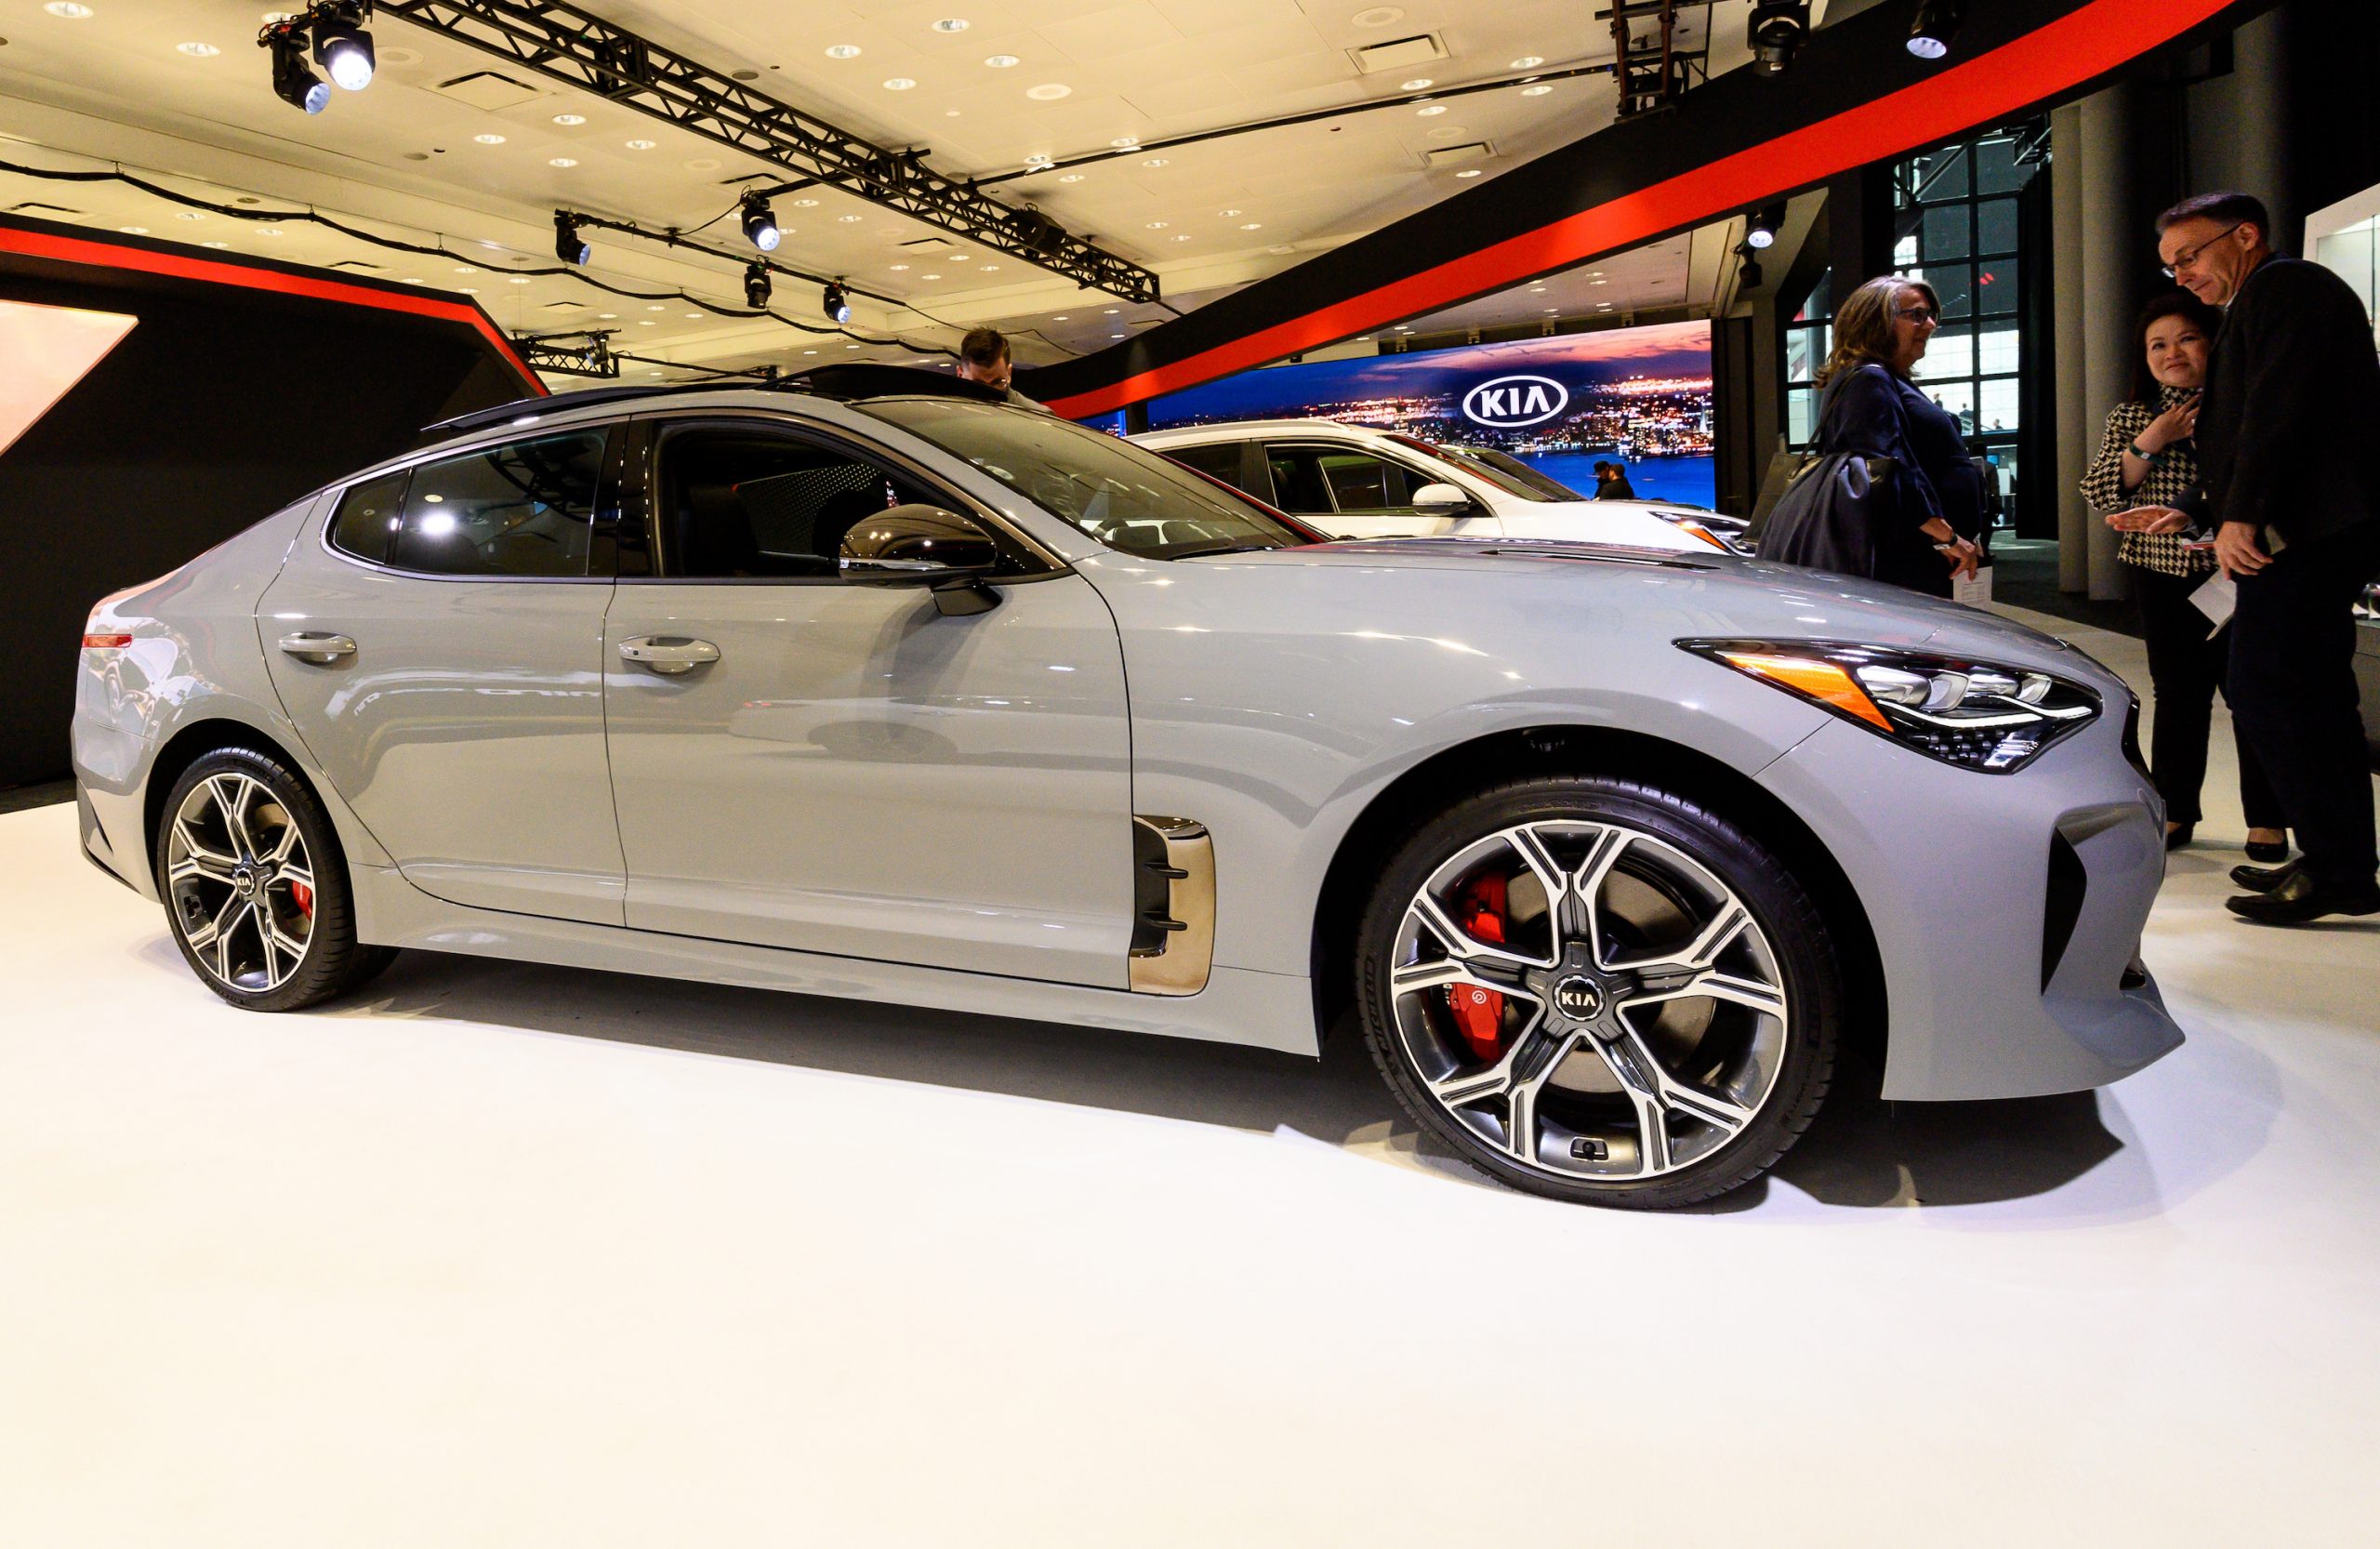 Gray Kia Stinger GT seen at the New York International Auto Show at the Jacob K. Javits Convention Center